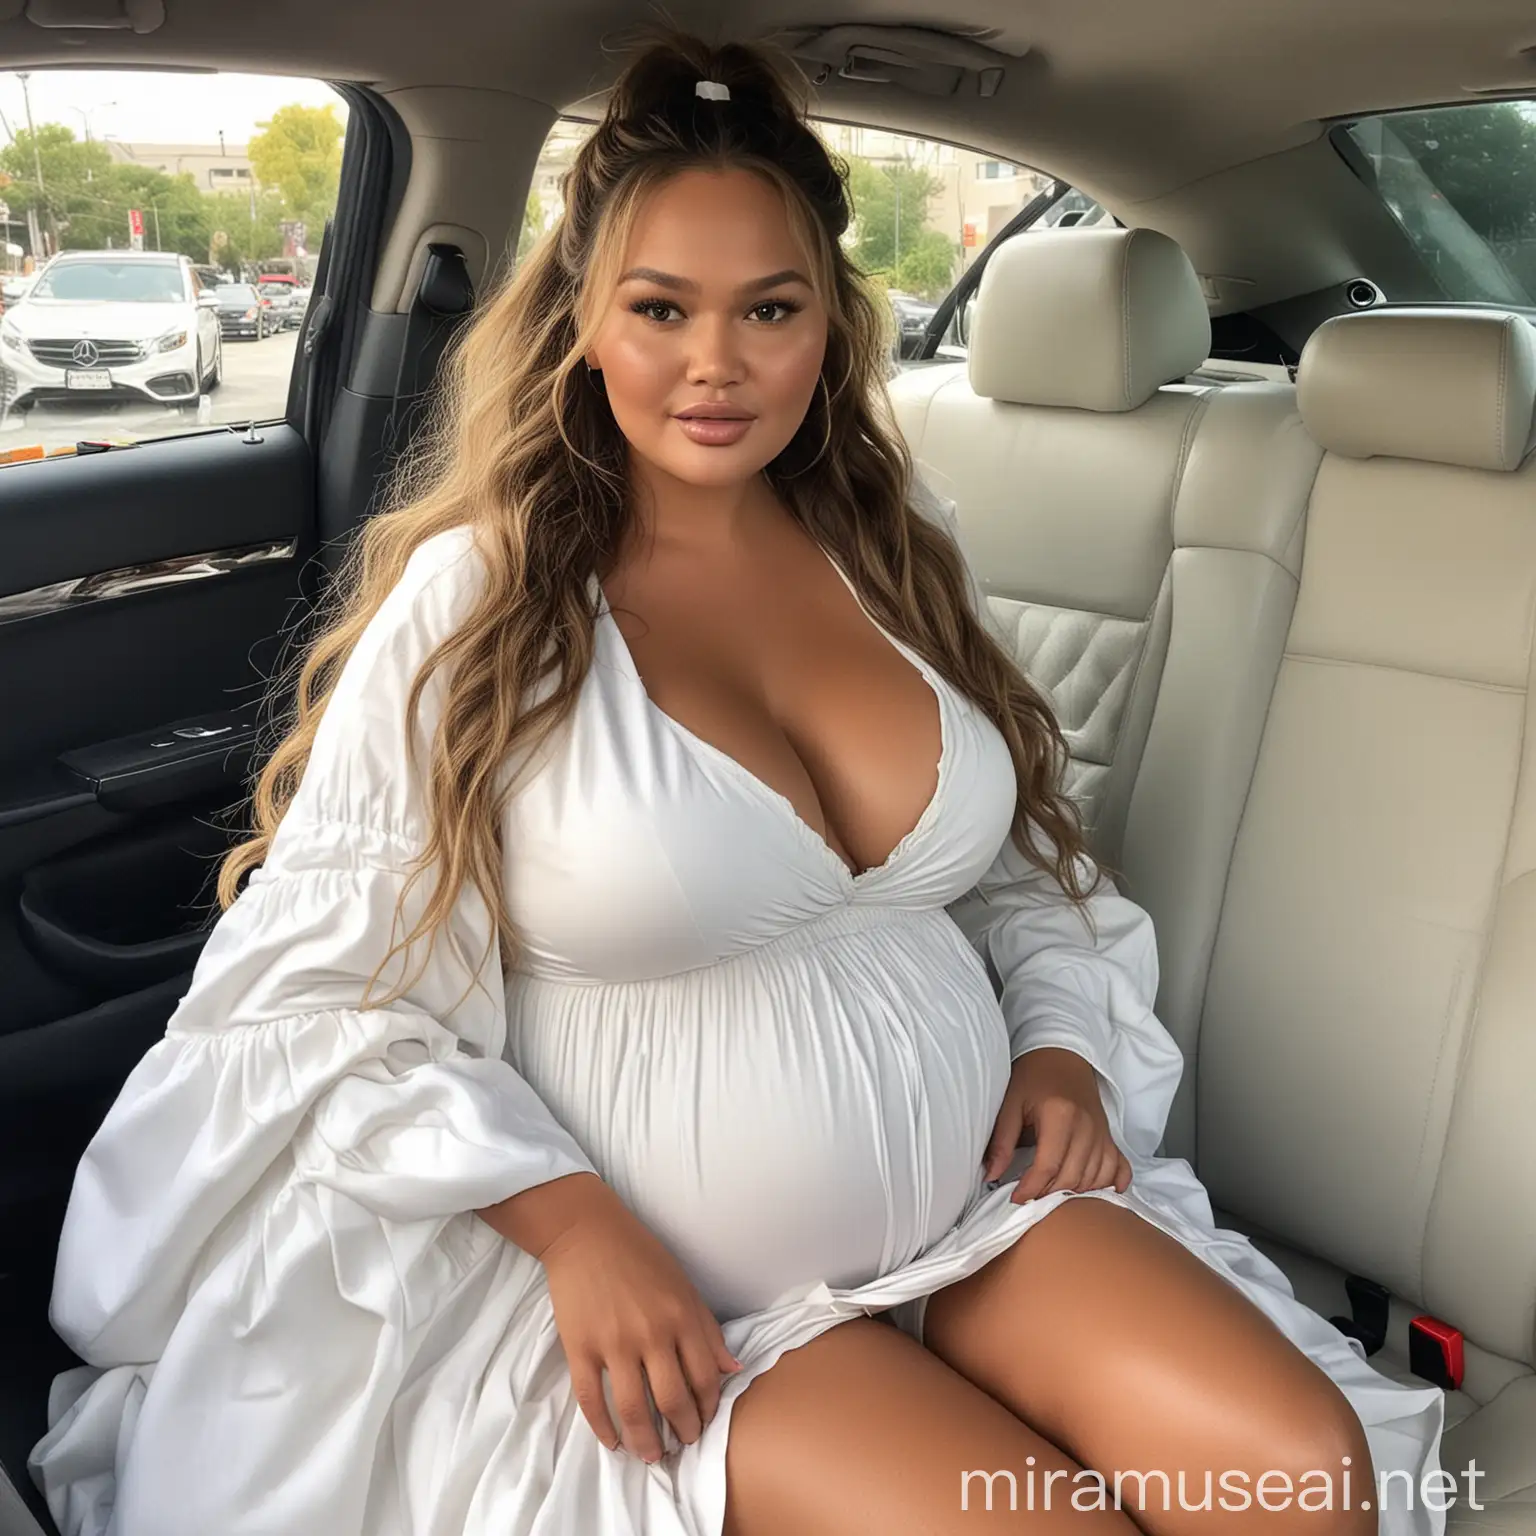 Pregnant Chrissy Teigen in White Outfit with Voluminous Hair